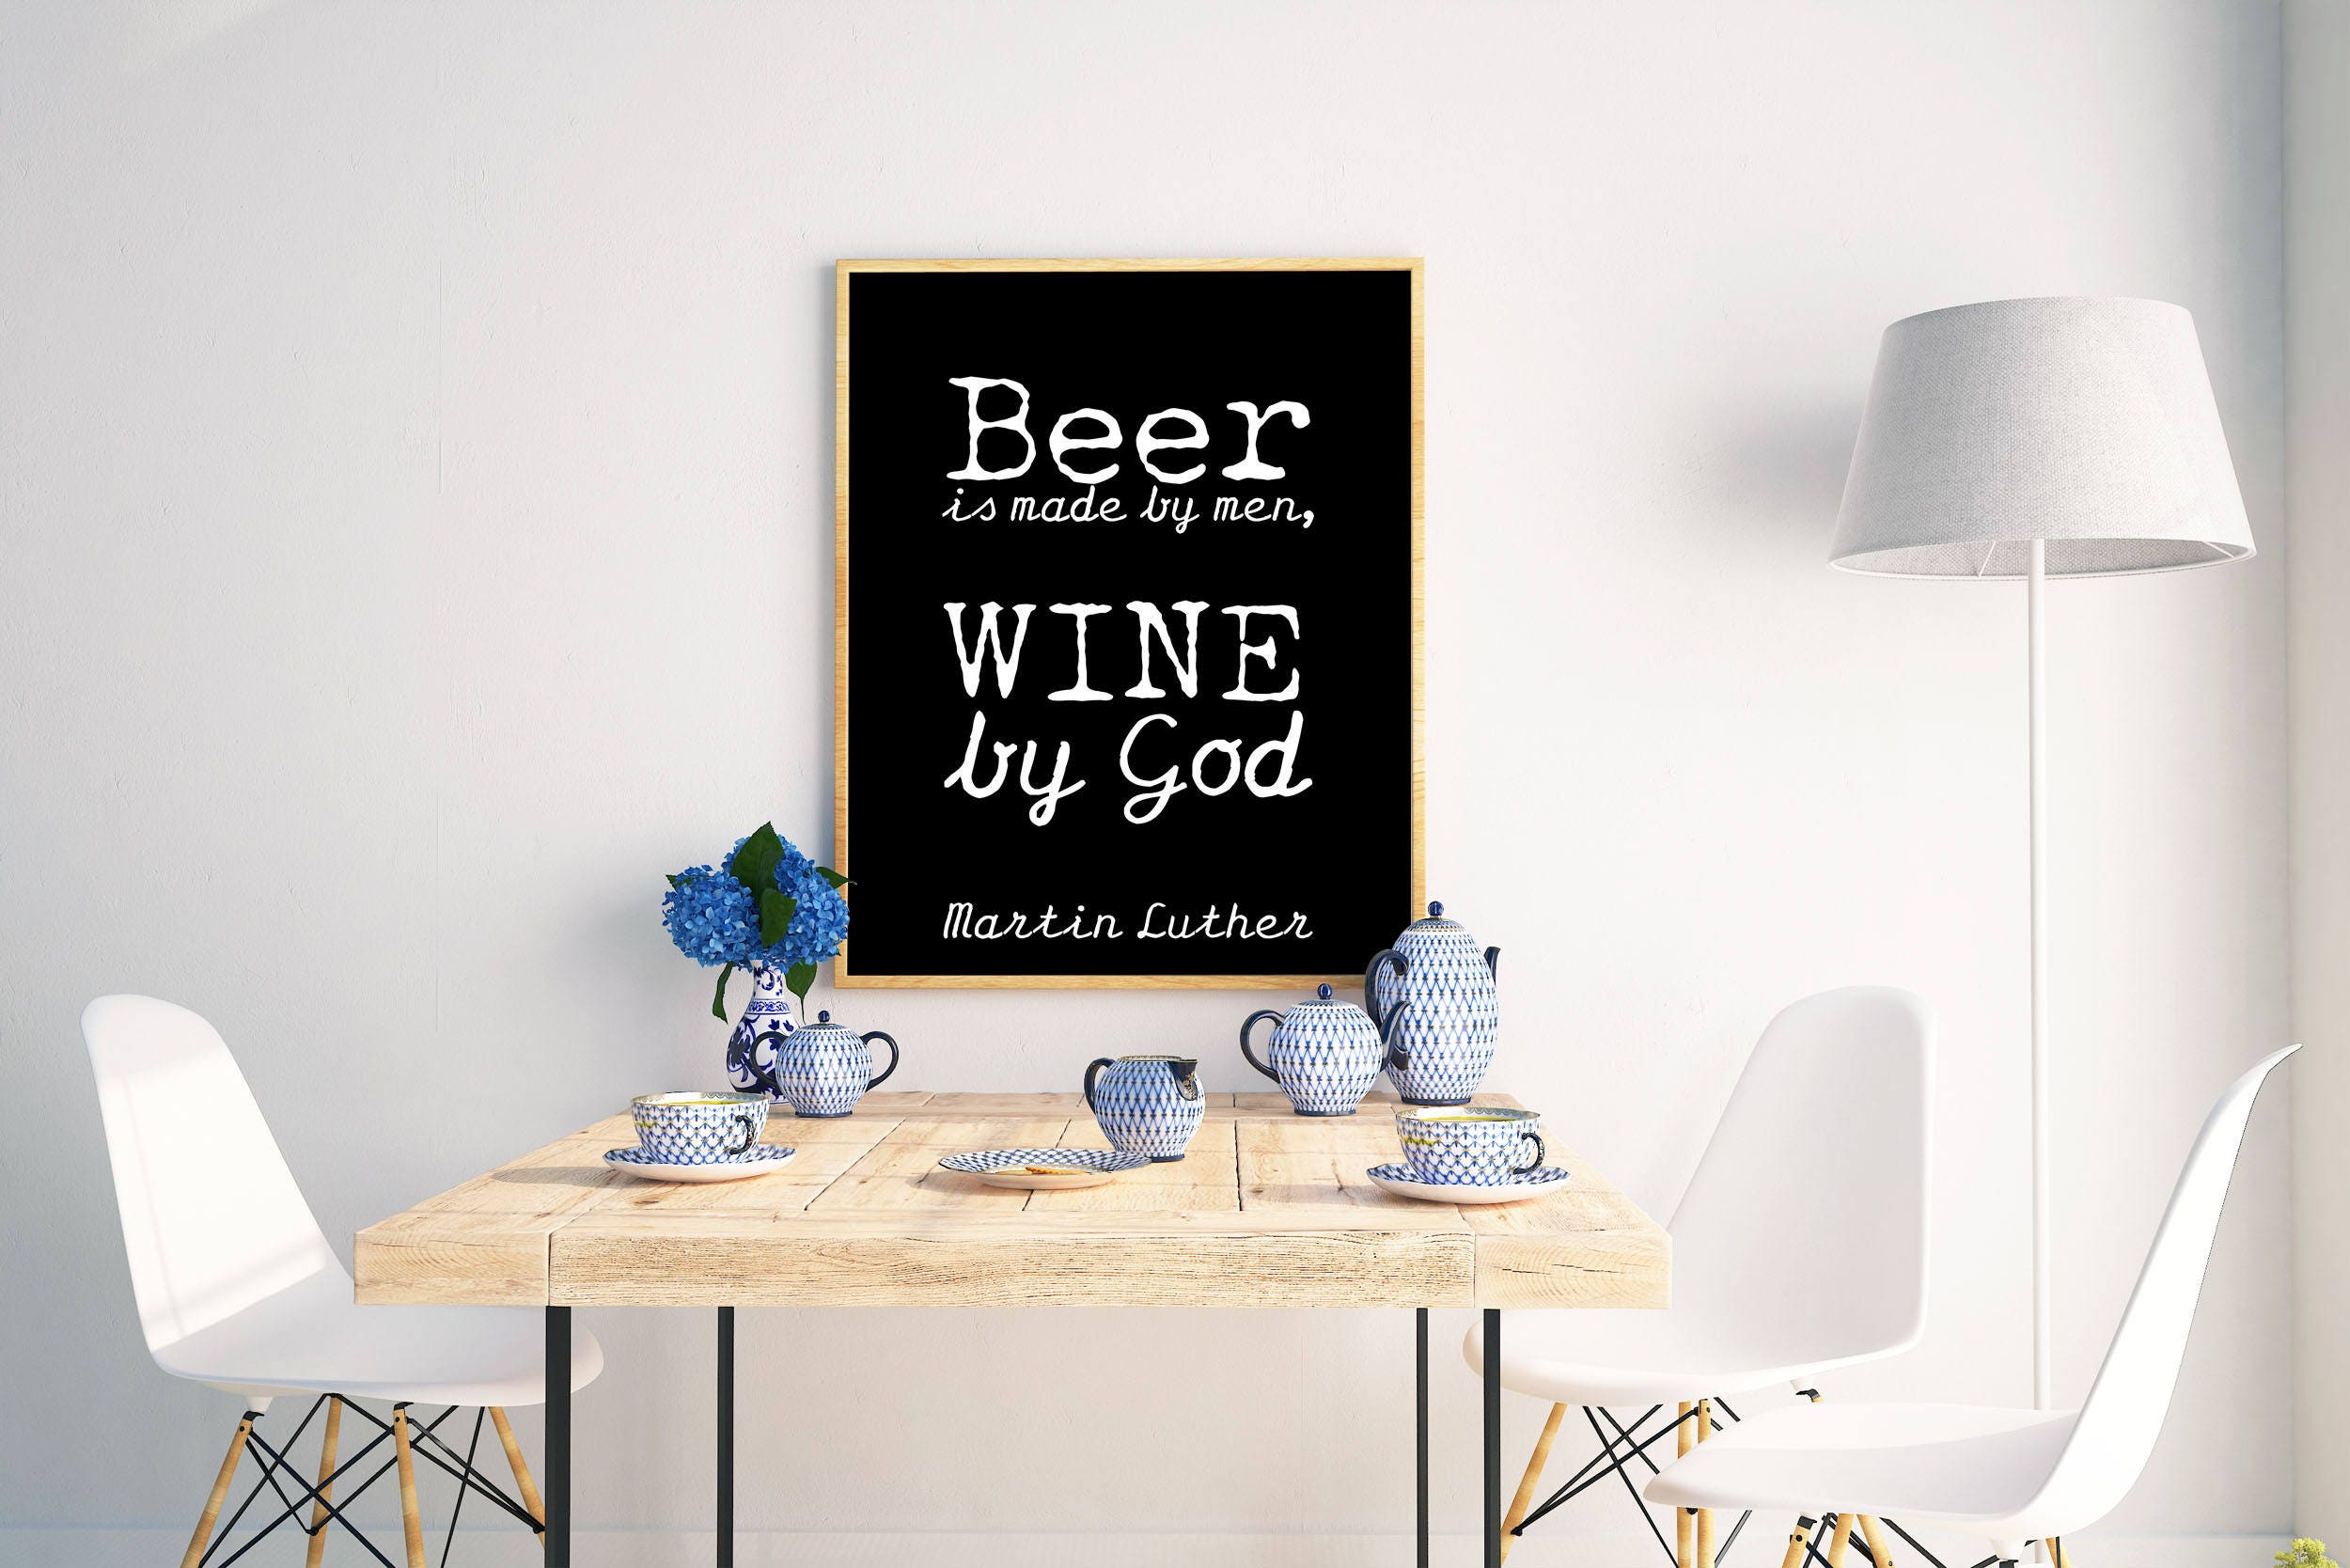 Martin Luther quote print for wine decor, beer is made by man wine by God quote poster print in black & white Unframed